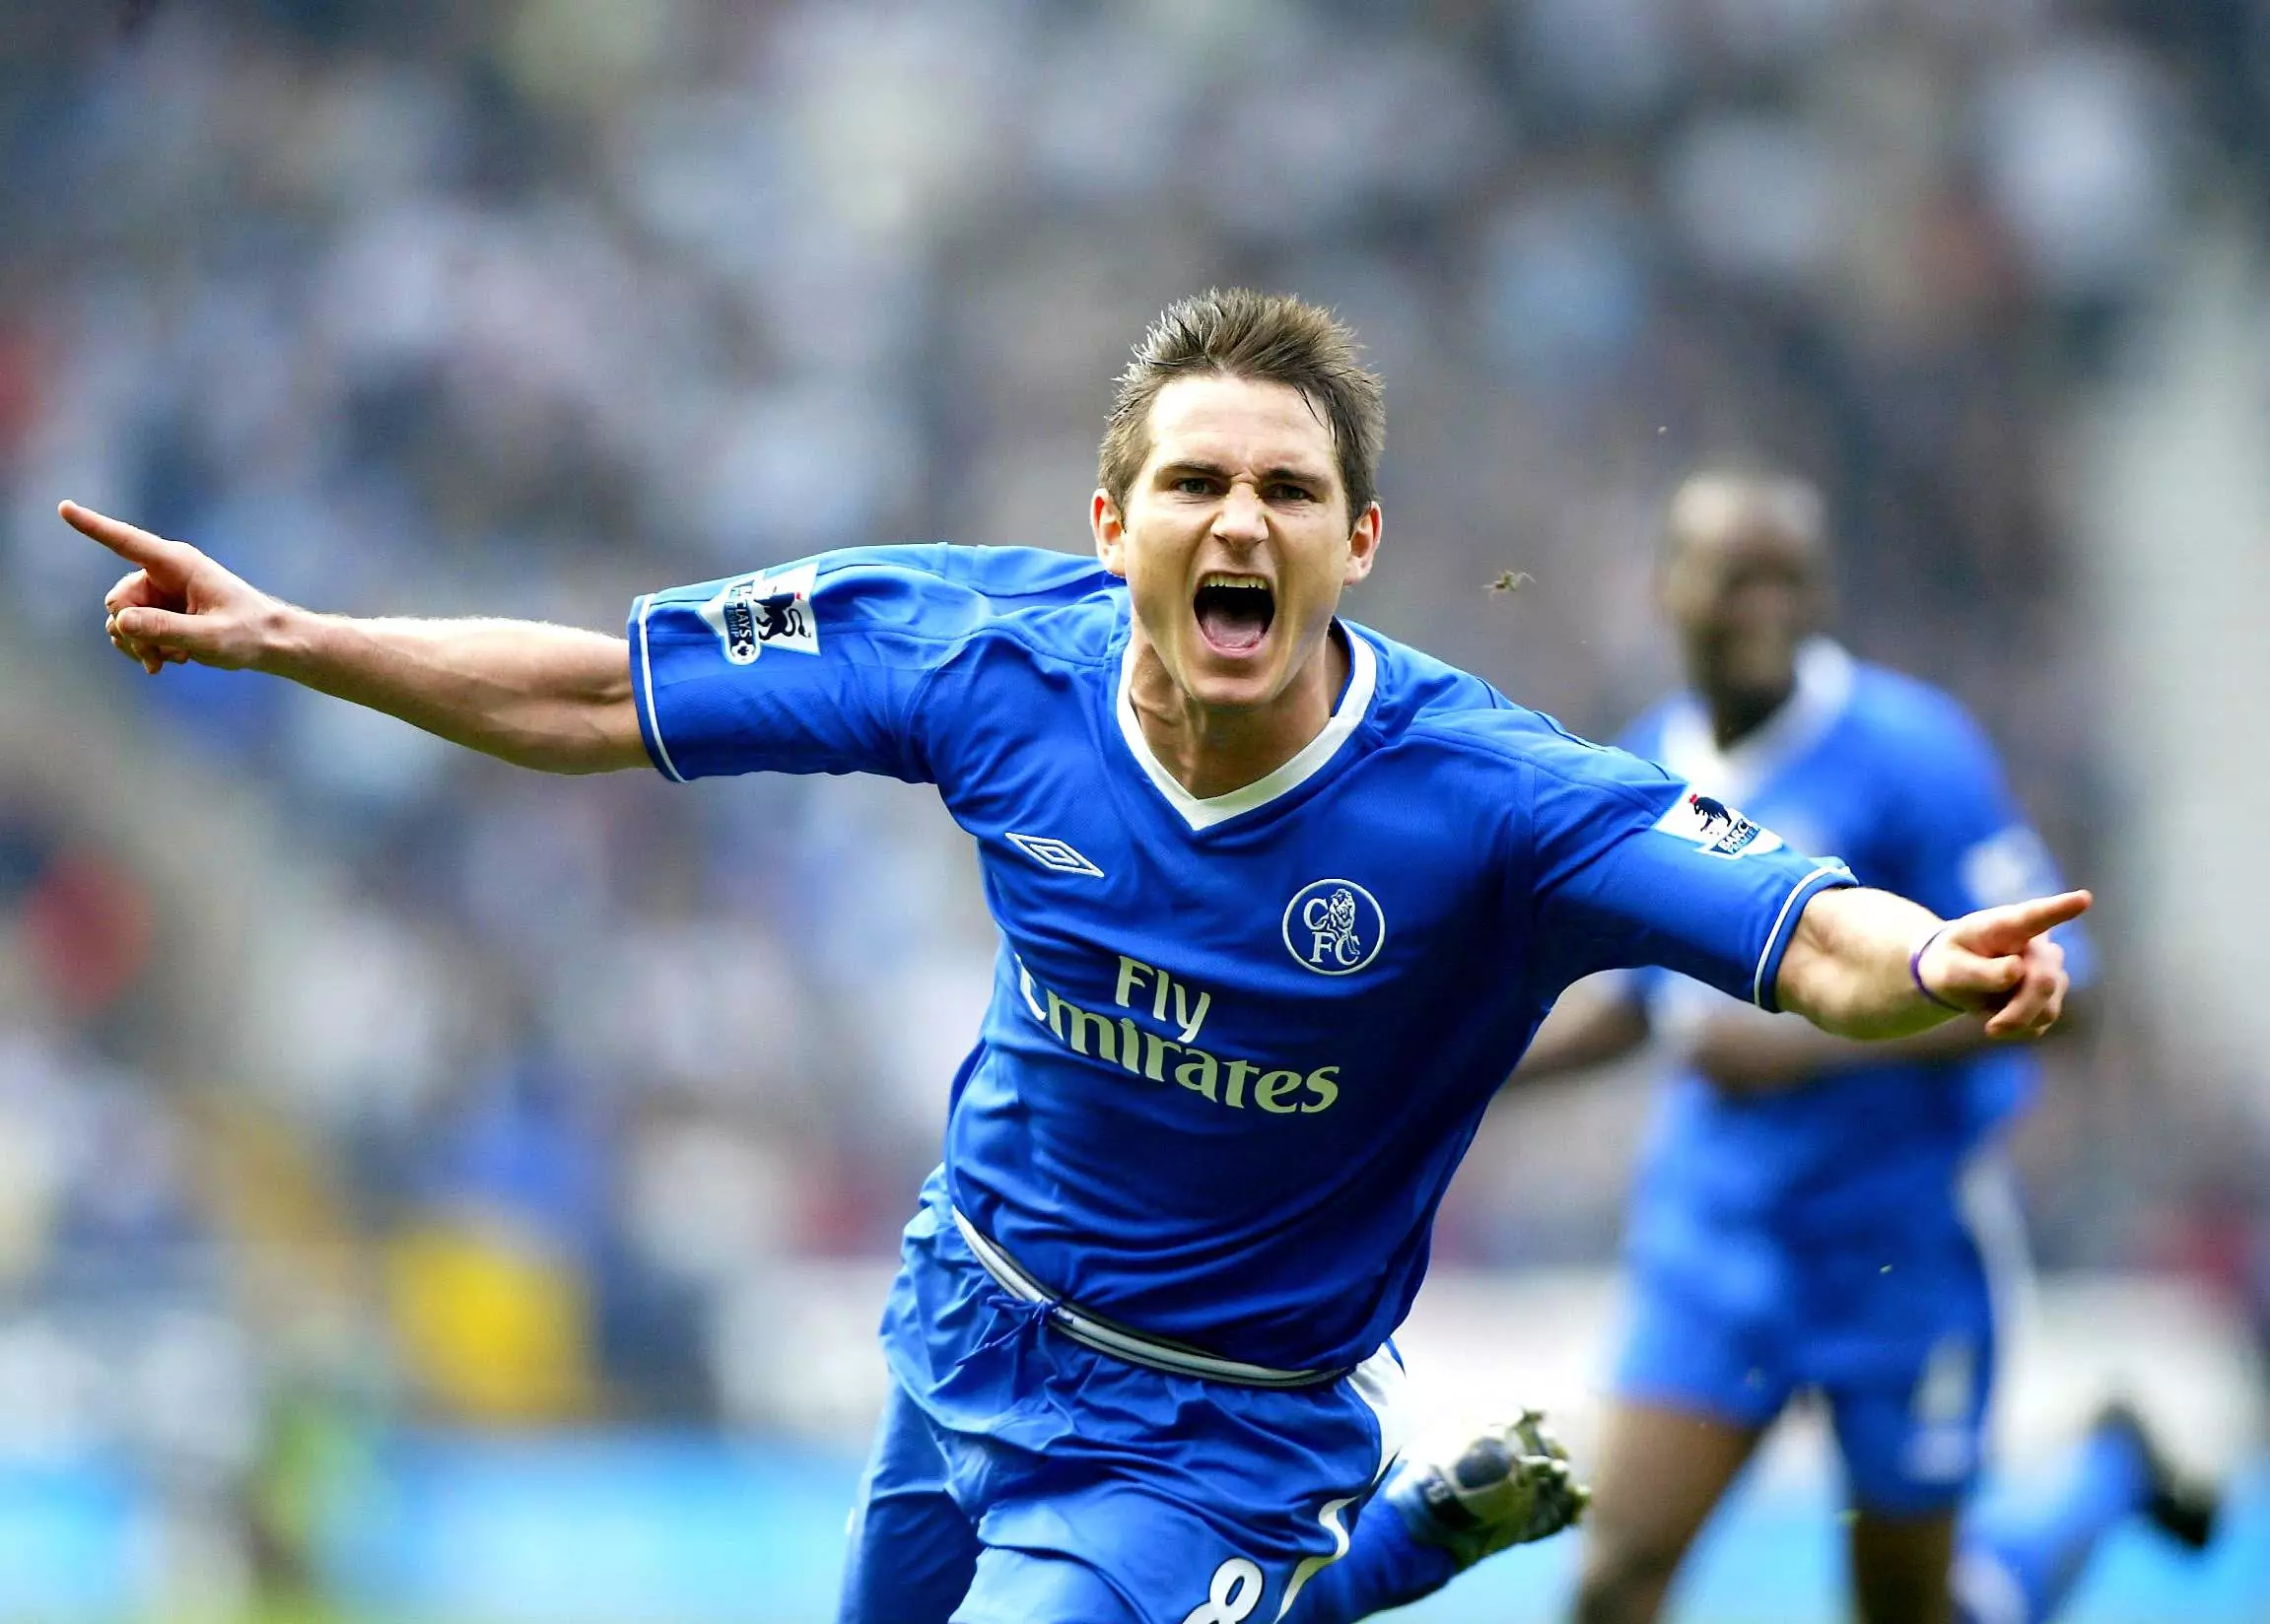 Lampard is a club legend from his playing days. Image: PA Images